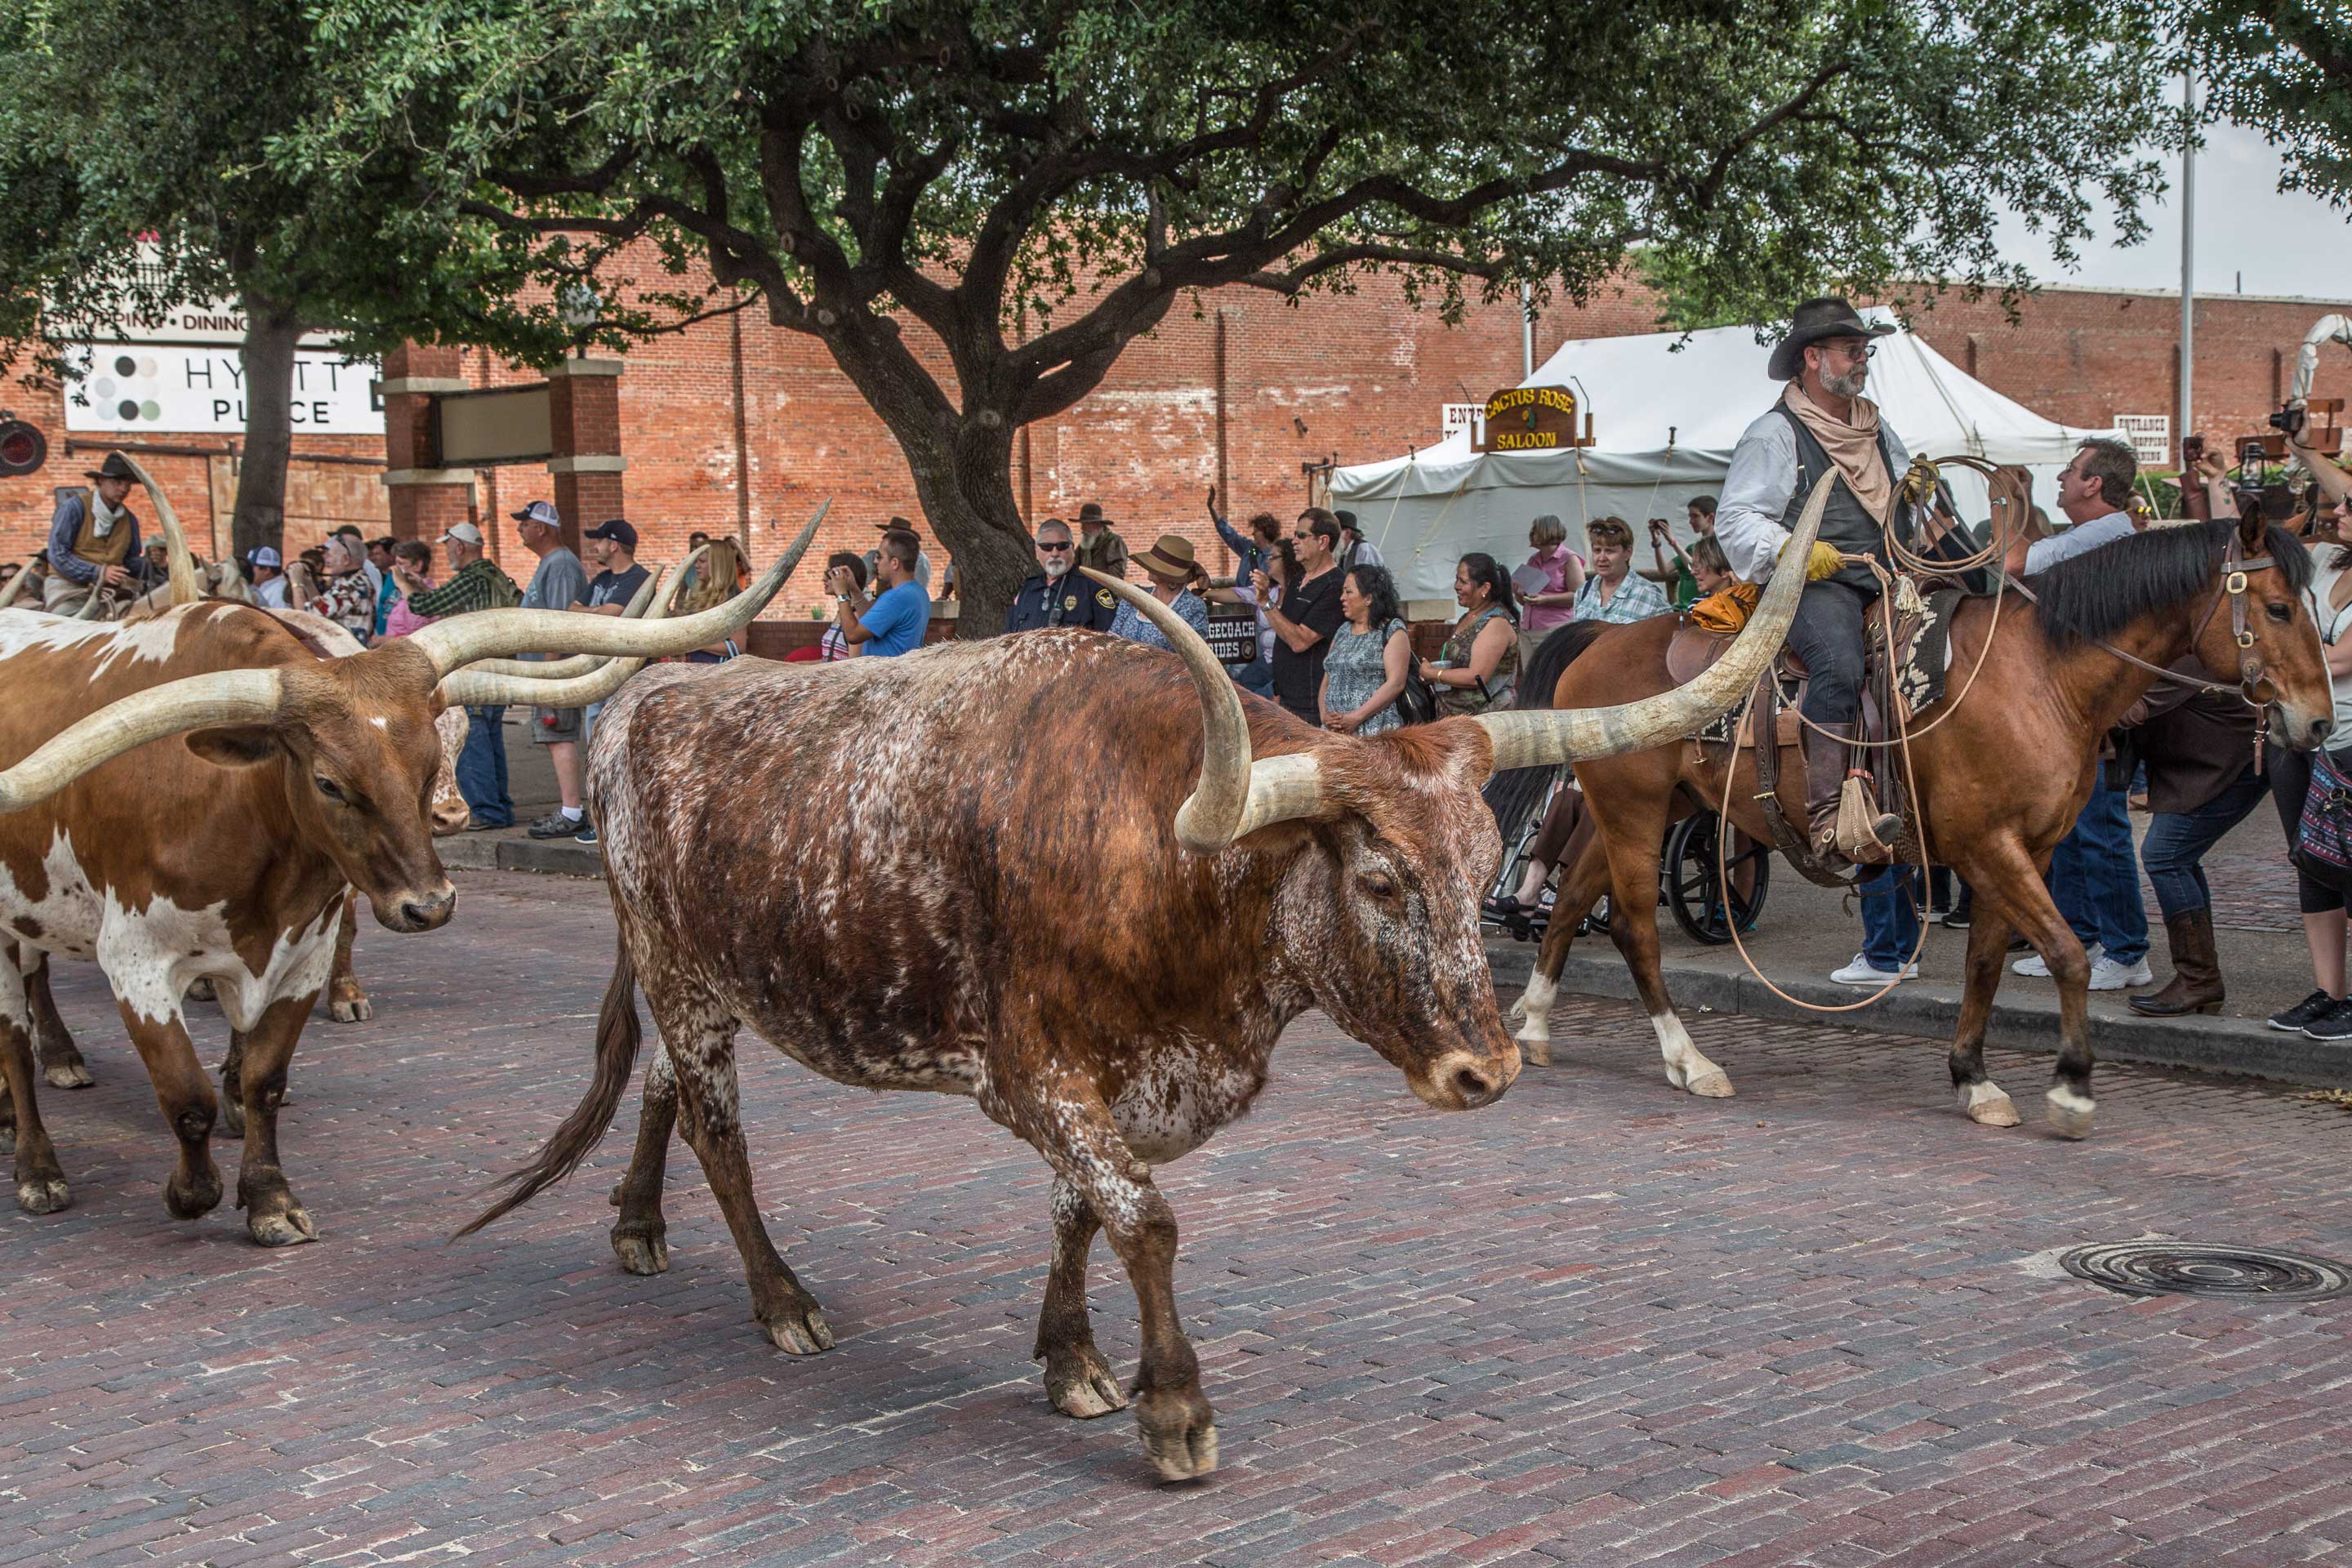 Touring The Fort Worth Stockyards In Fort Worth, Texas 